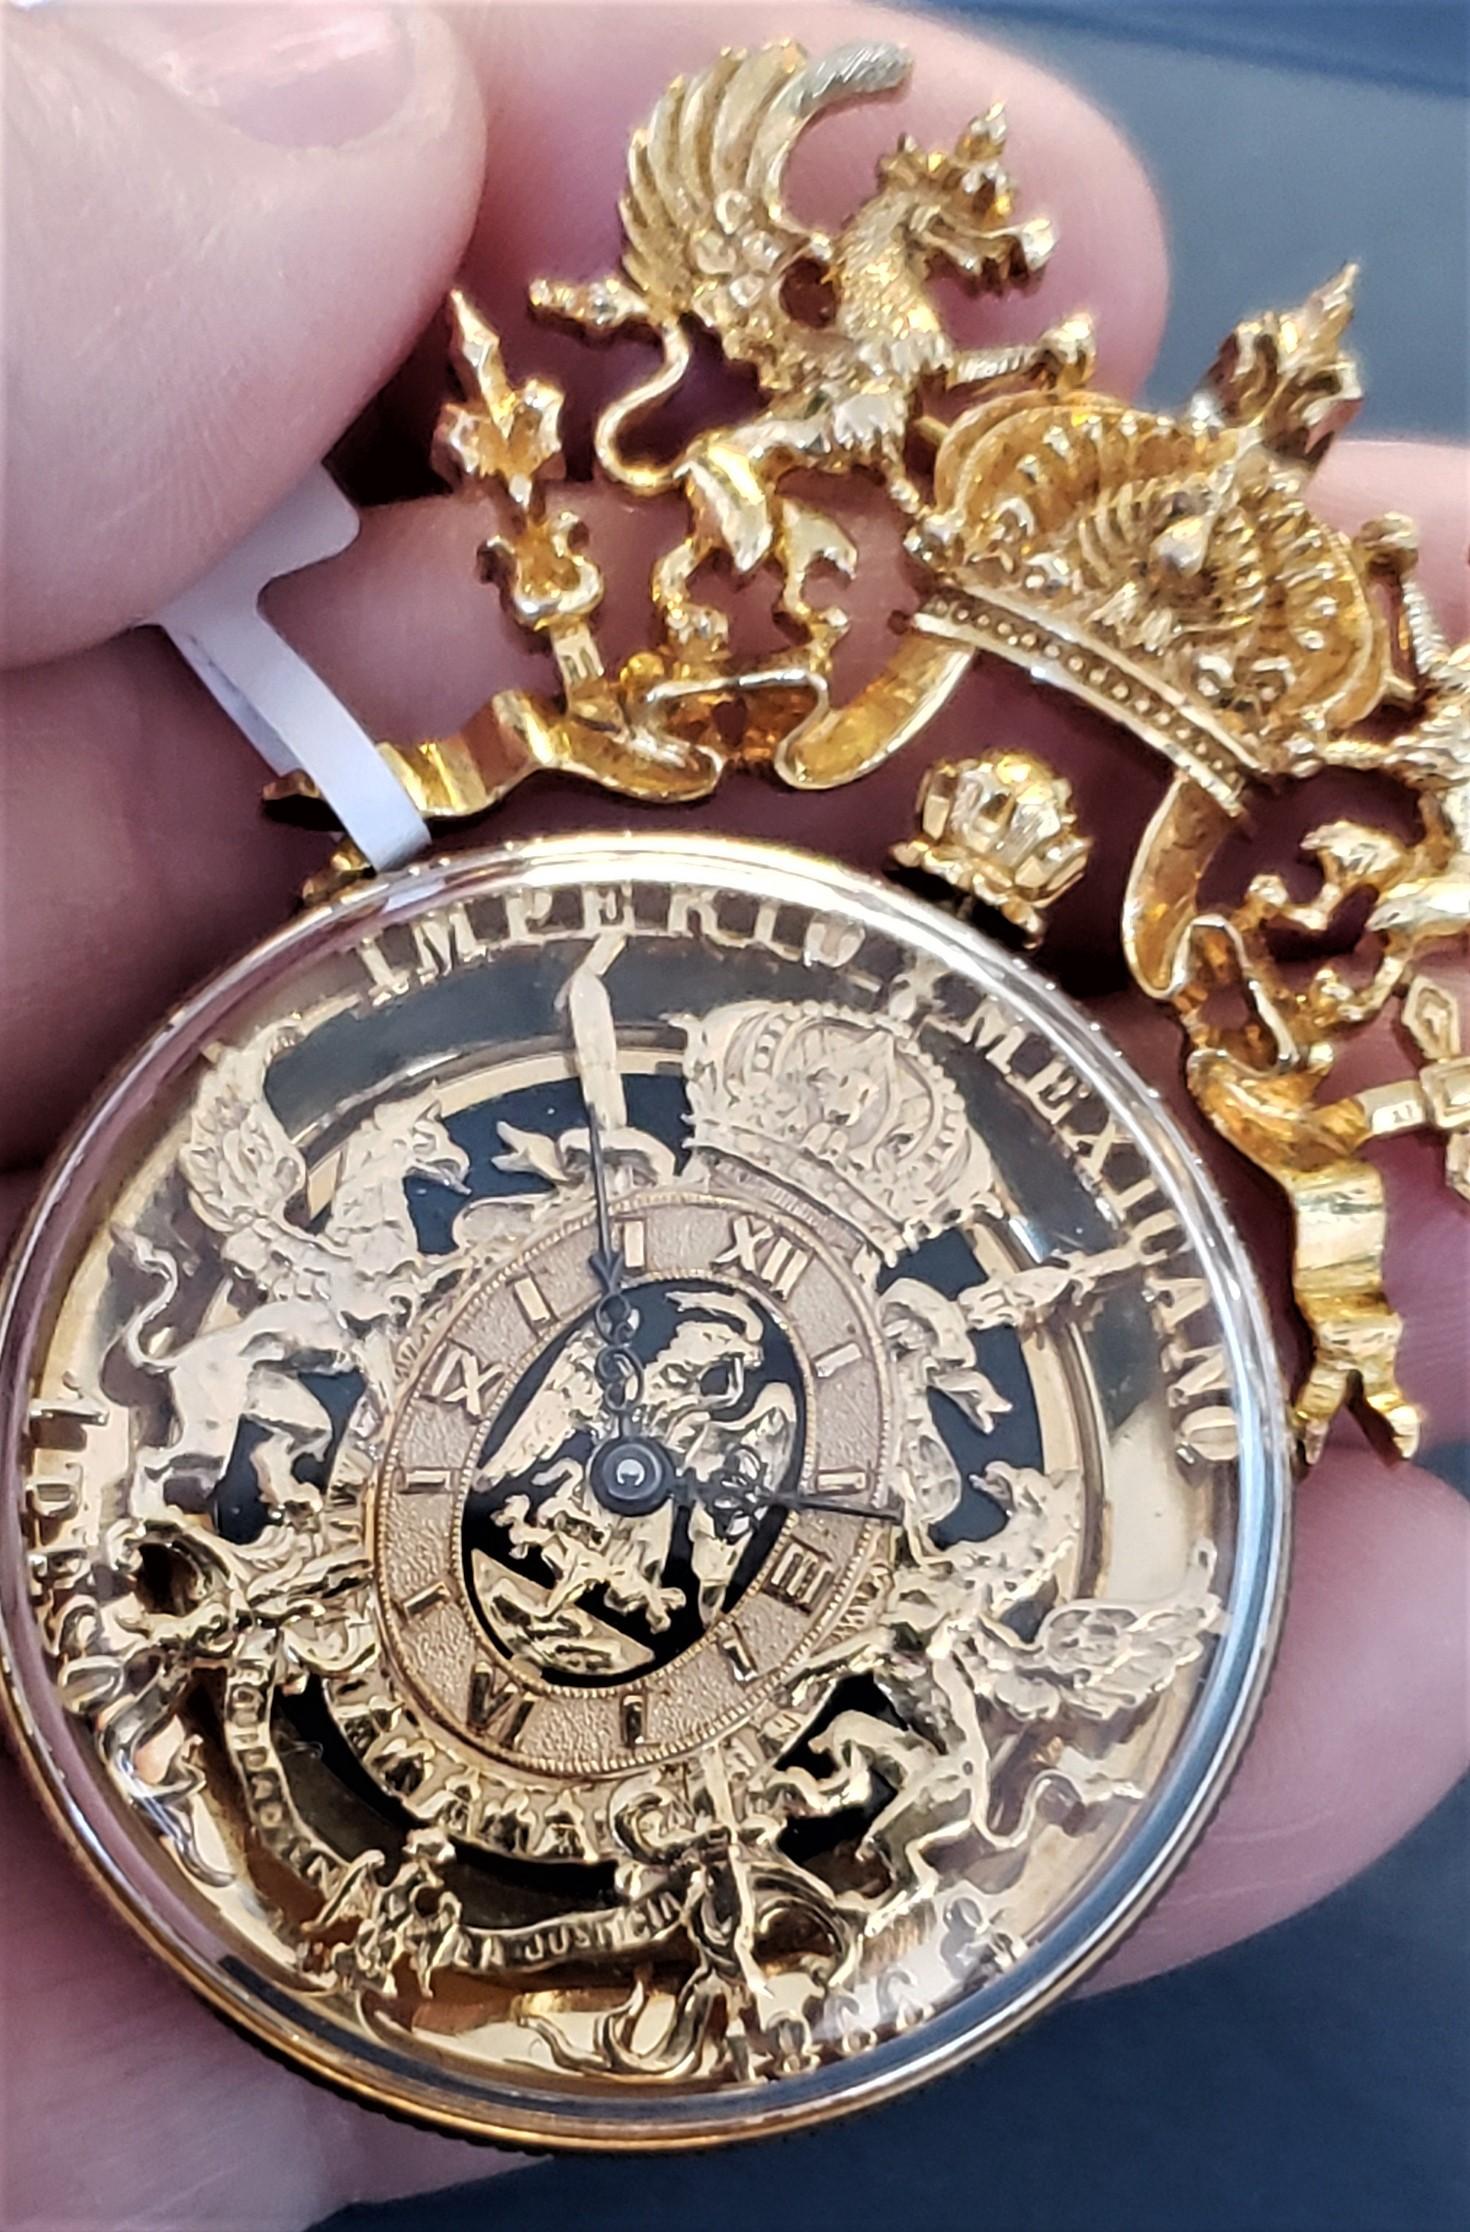 Paul Flato Imperio Mexicano 1866 One Peso Watch/Pin/Pendant 18K 44.4g


The watch came from the certified watchmaker on January 24, 2024. Mechanical movement manual wind - all working condition. All the gold details are in very good shape, no broken